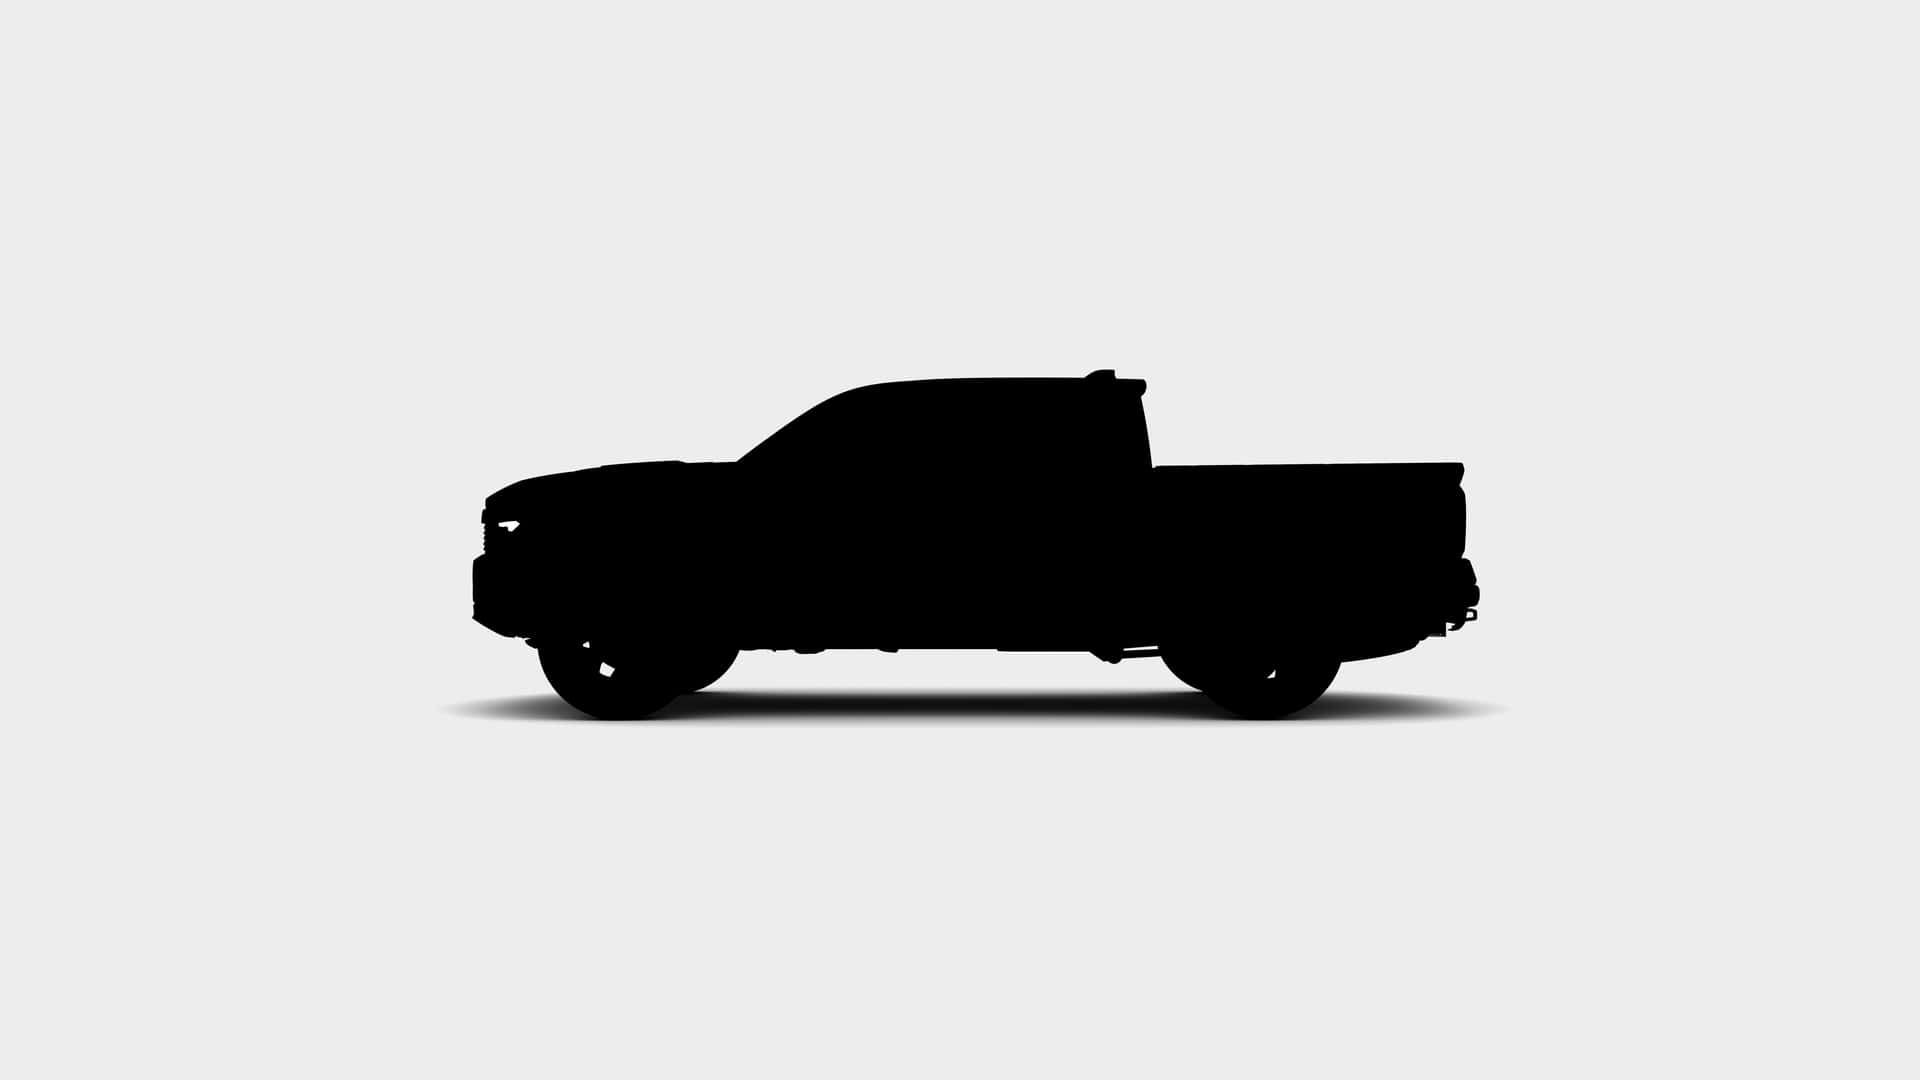 2024 Tacoma Official: 2024 Toyota Tacoma Debuts May 19 + New Silhouette Teasers Confirm Different Cab & Wheelbase Configurations 2024-toyota-tacoma-new-teaser-image4